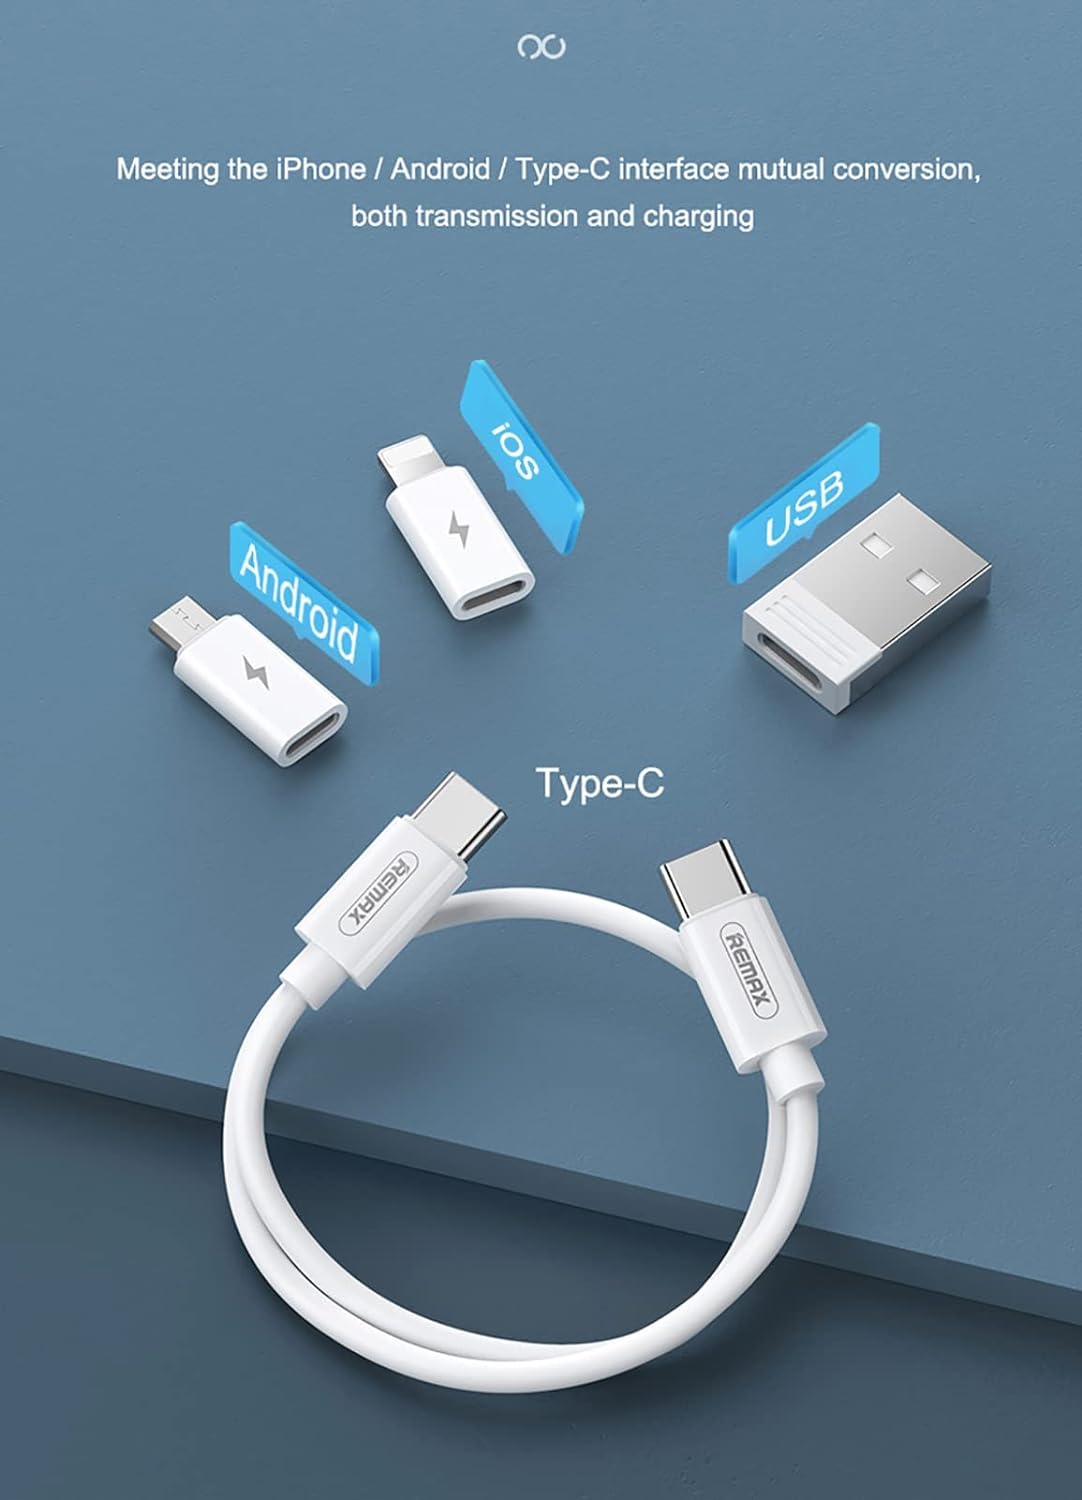 Adapter kit, usb c to lightning adapter : Multifunctional Cable Storage Box, Conversion Set USB A- Type C to Male Micro/Type C/Lightning, Data Transfer, Card Storage, Tray Eject Pin, Phone Holder